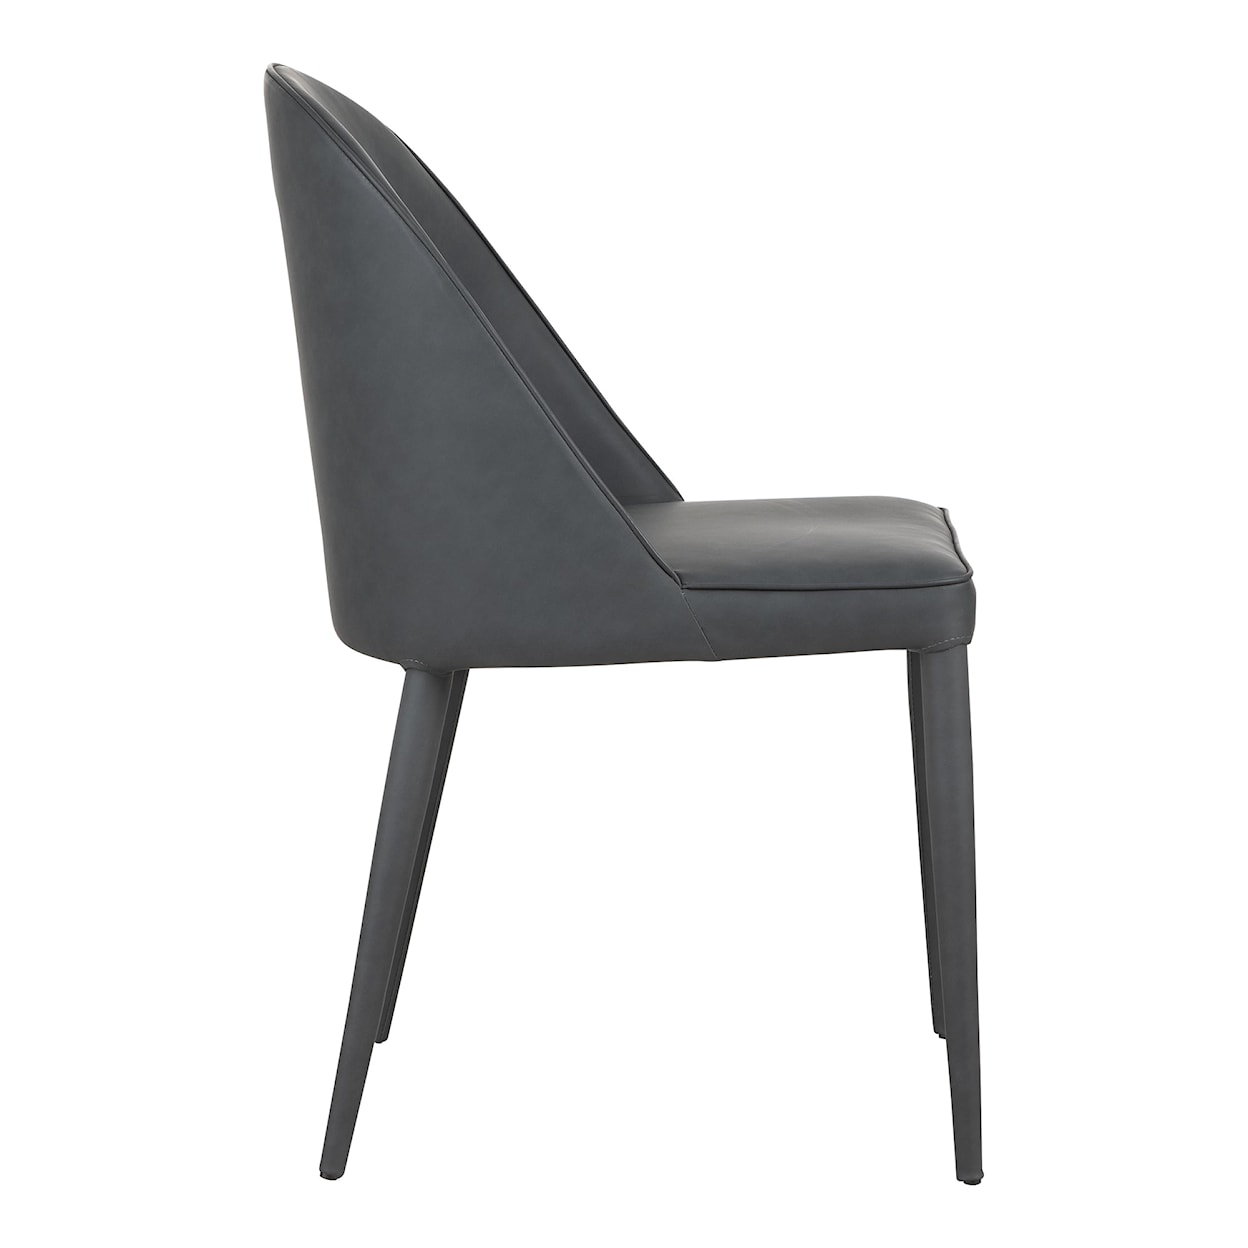 Moe's Home Collection Burton Vegan Leather Dining Chair